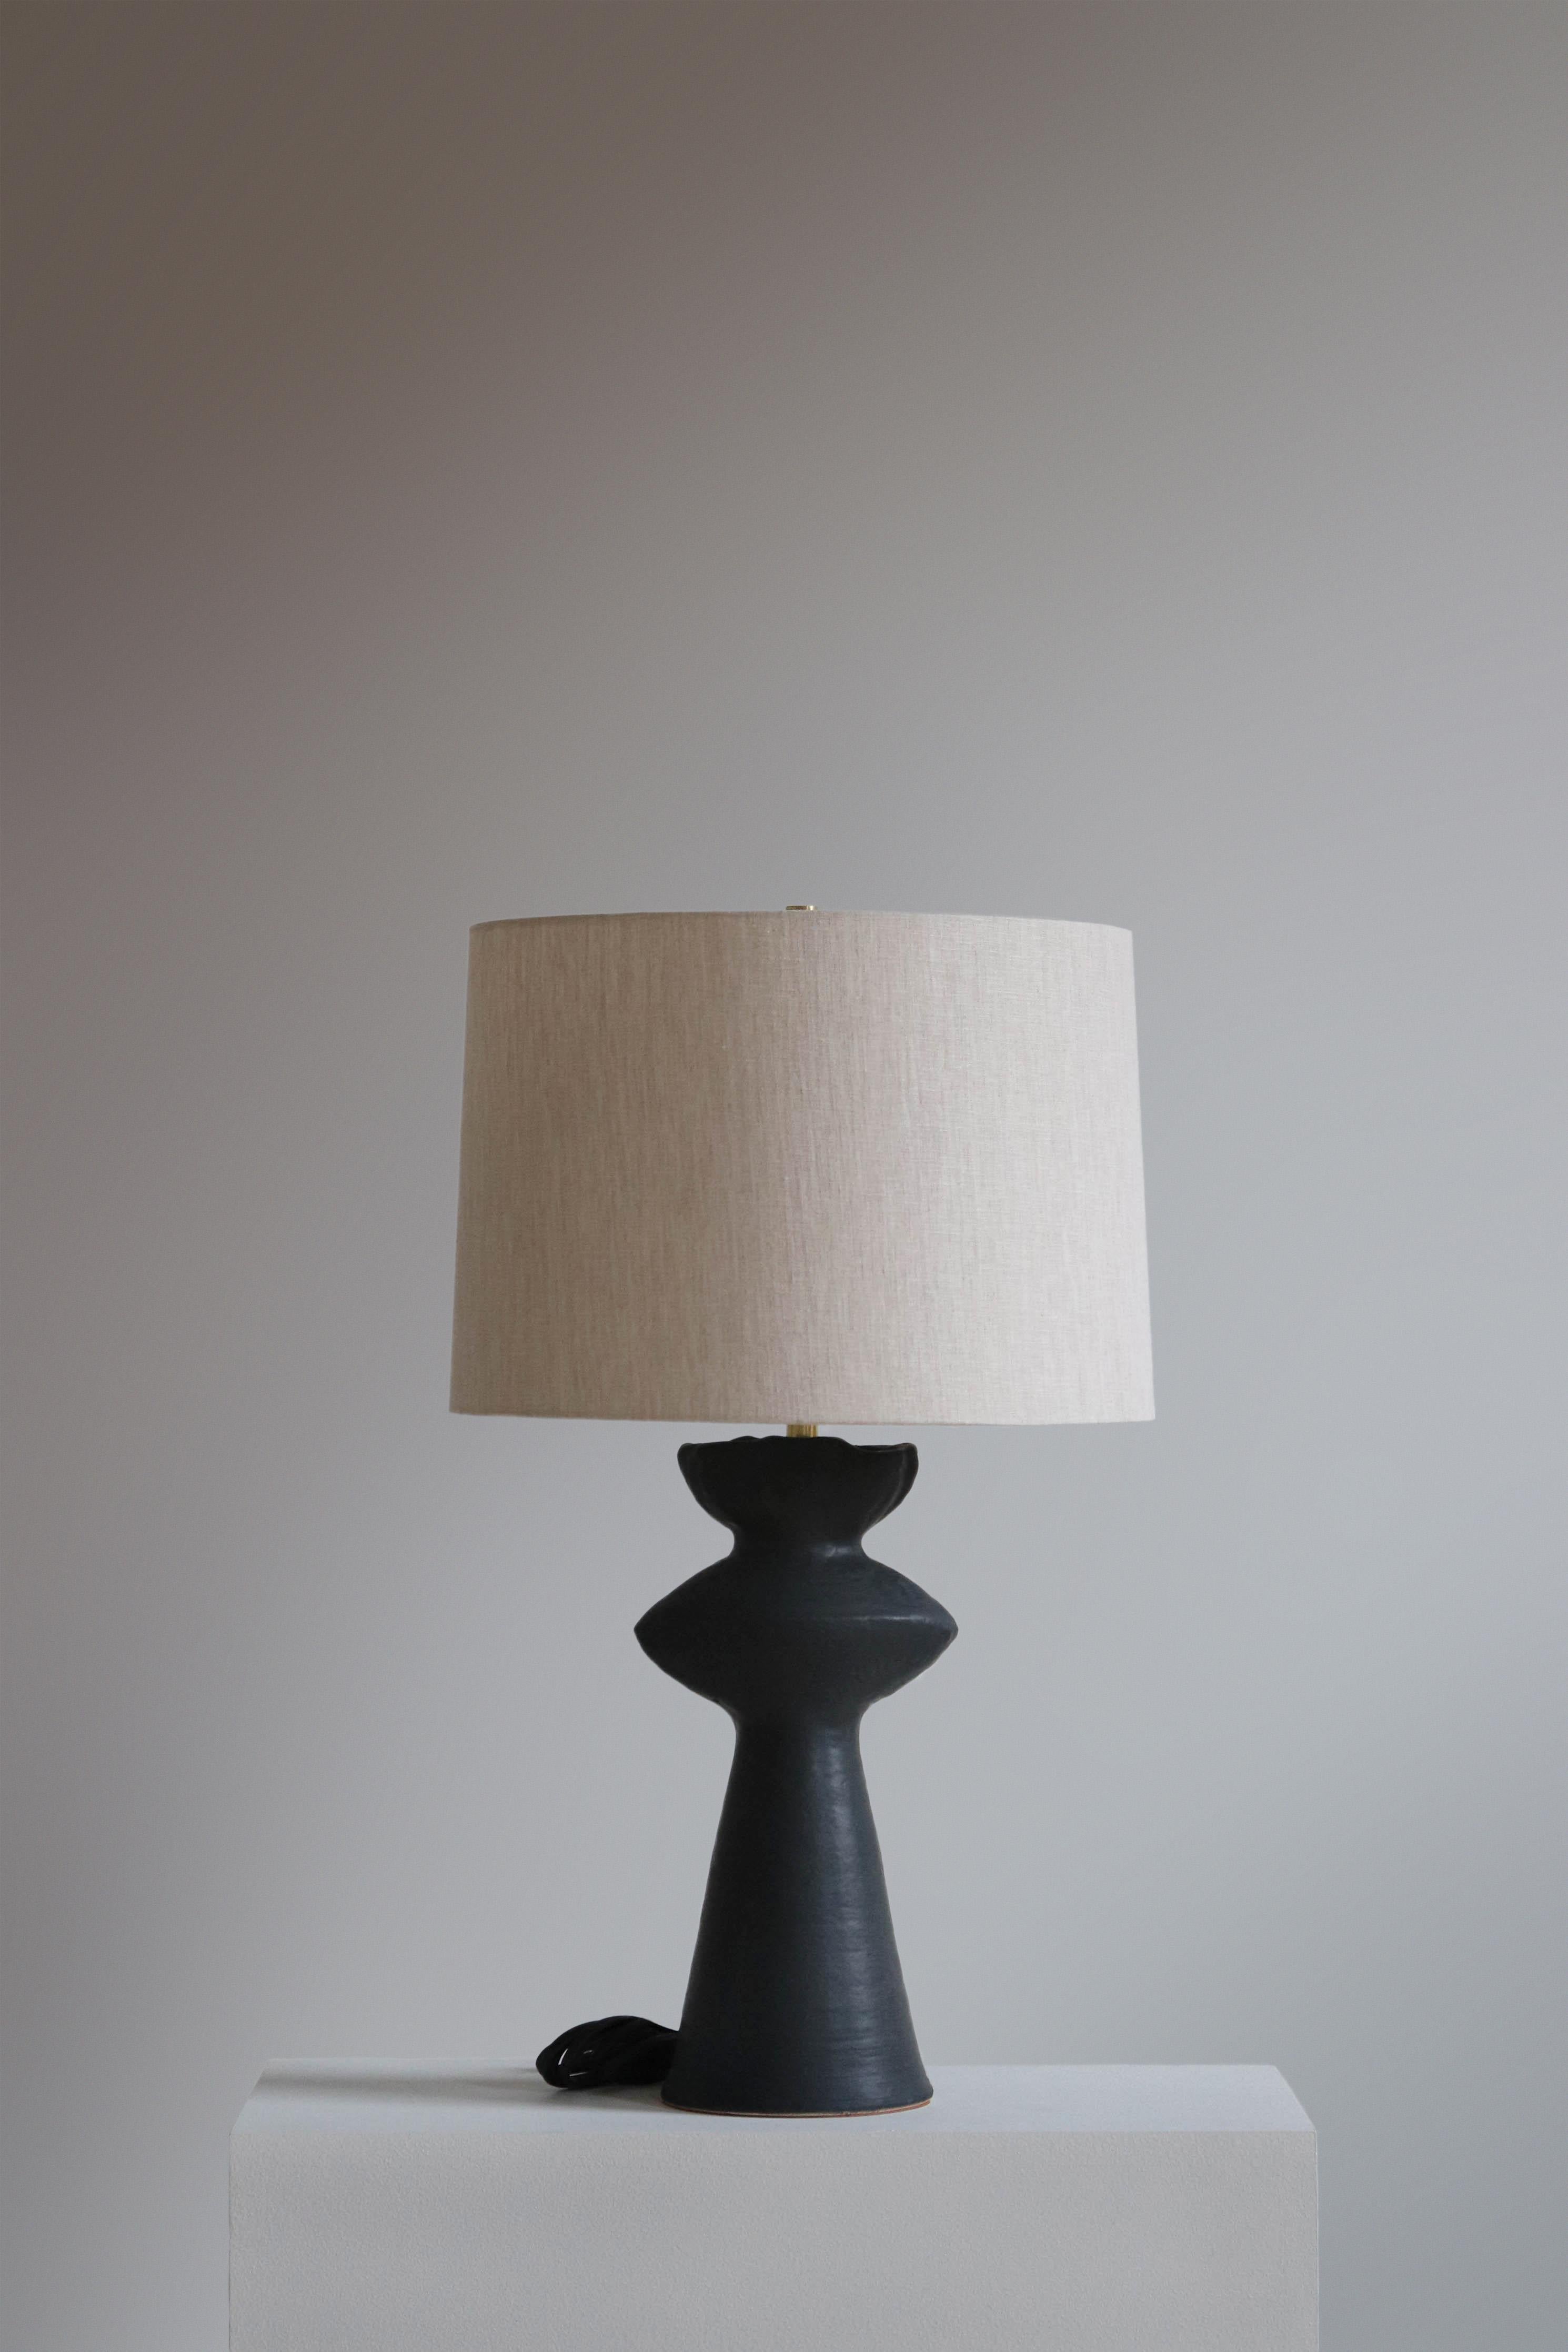 Anthracite Cicero 26 Table Lamp by  Danny Kaplan Studio
Dimensions: ⌀ 41 x H 66 cm
Materials: Glazed Ceramic, Unfinished Brass, Linen

This item is handmade, and may exhibit variability within the same piece. We do our best to maintain a consistent